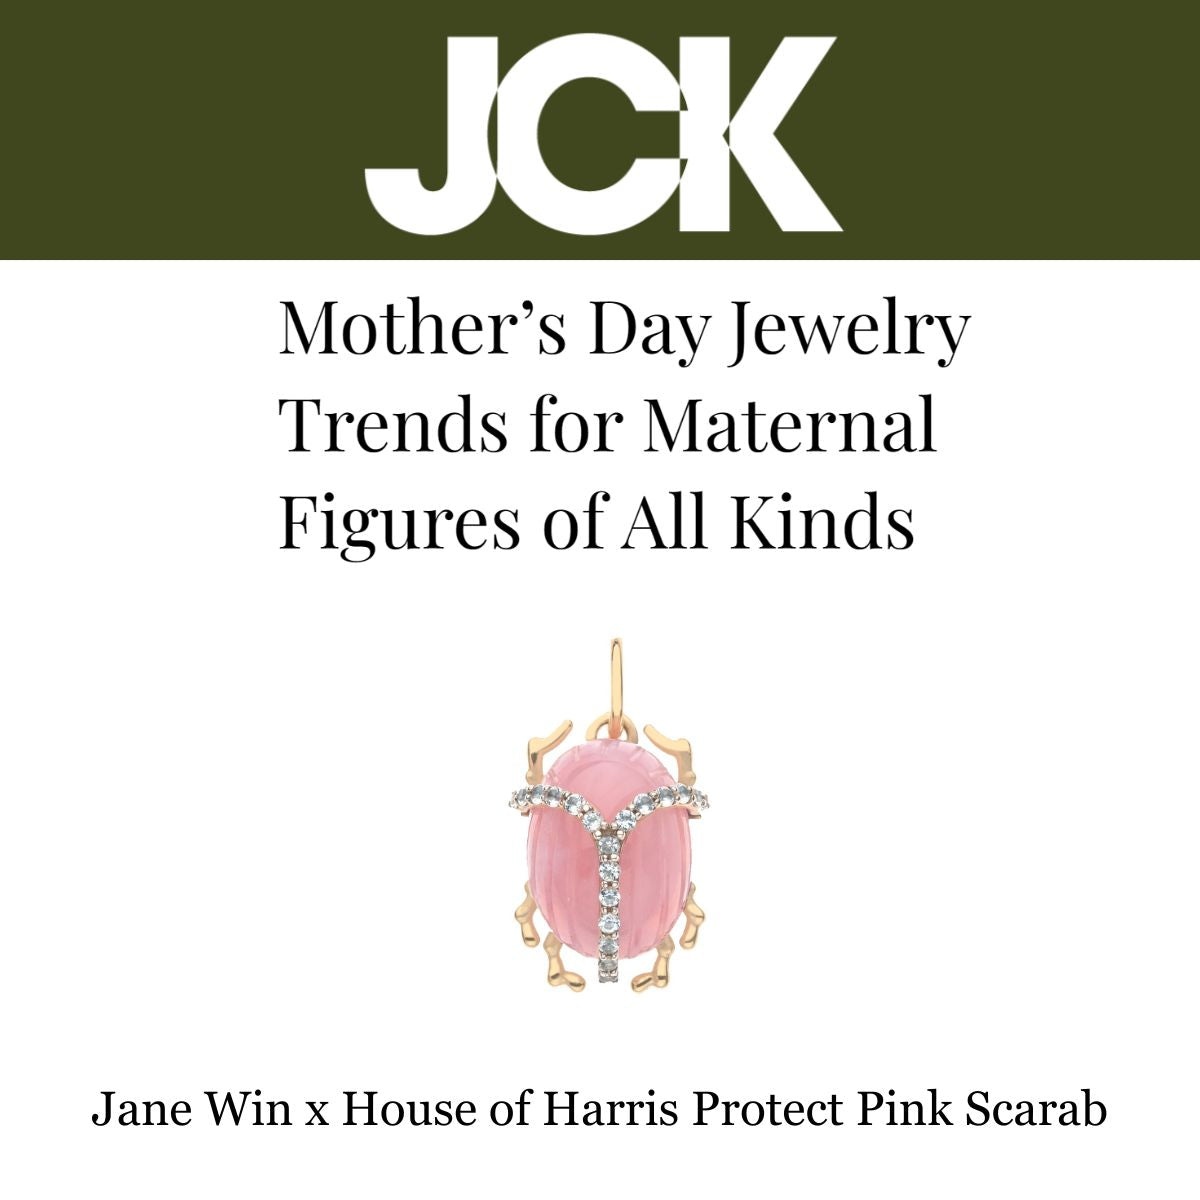 Press Highlight: JCK's "Mother’s Day Jewelry Trends for Maternal Figures of All Kinds"